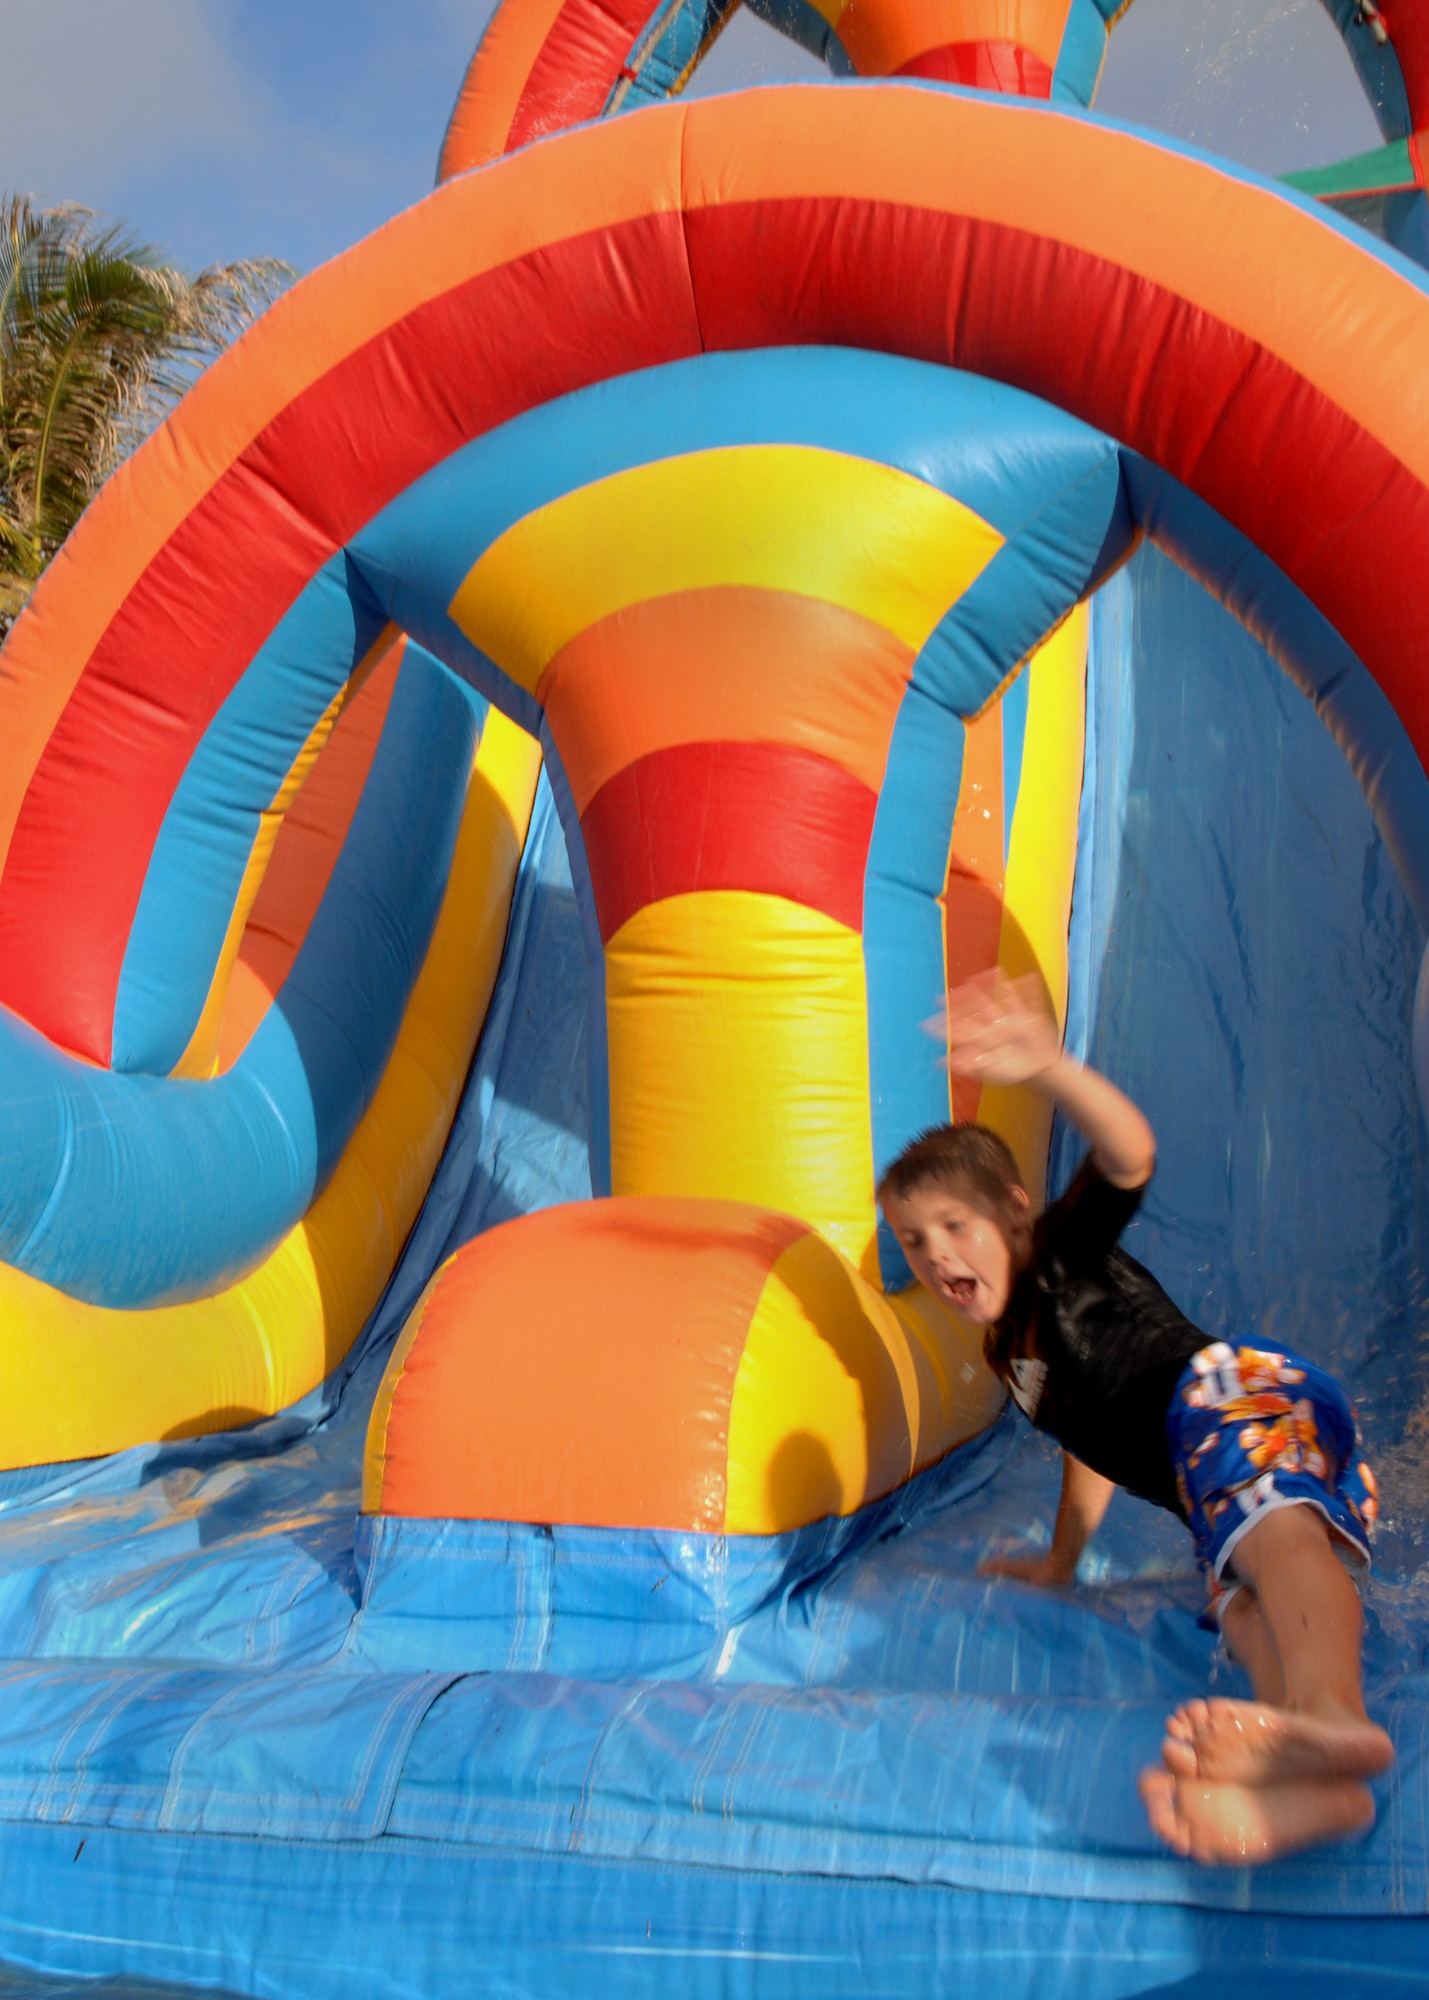 Brenden Paradis slides down the inflatable water slide into a pool or water during Freedom Fest at Arc Light Park here July 3. The water slide was one of many activities for the children to enjoy at Freedom Fest. Freedom Fest is hosted by the 36th Force Support Squadron and held annually to recognize and celebrate our Independence Day. (U.S. Air Force photo by Airman 1st Class Nichelle Griffiths)